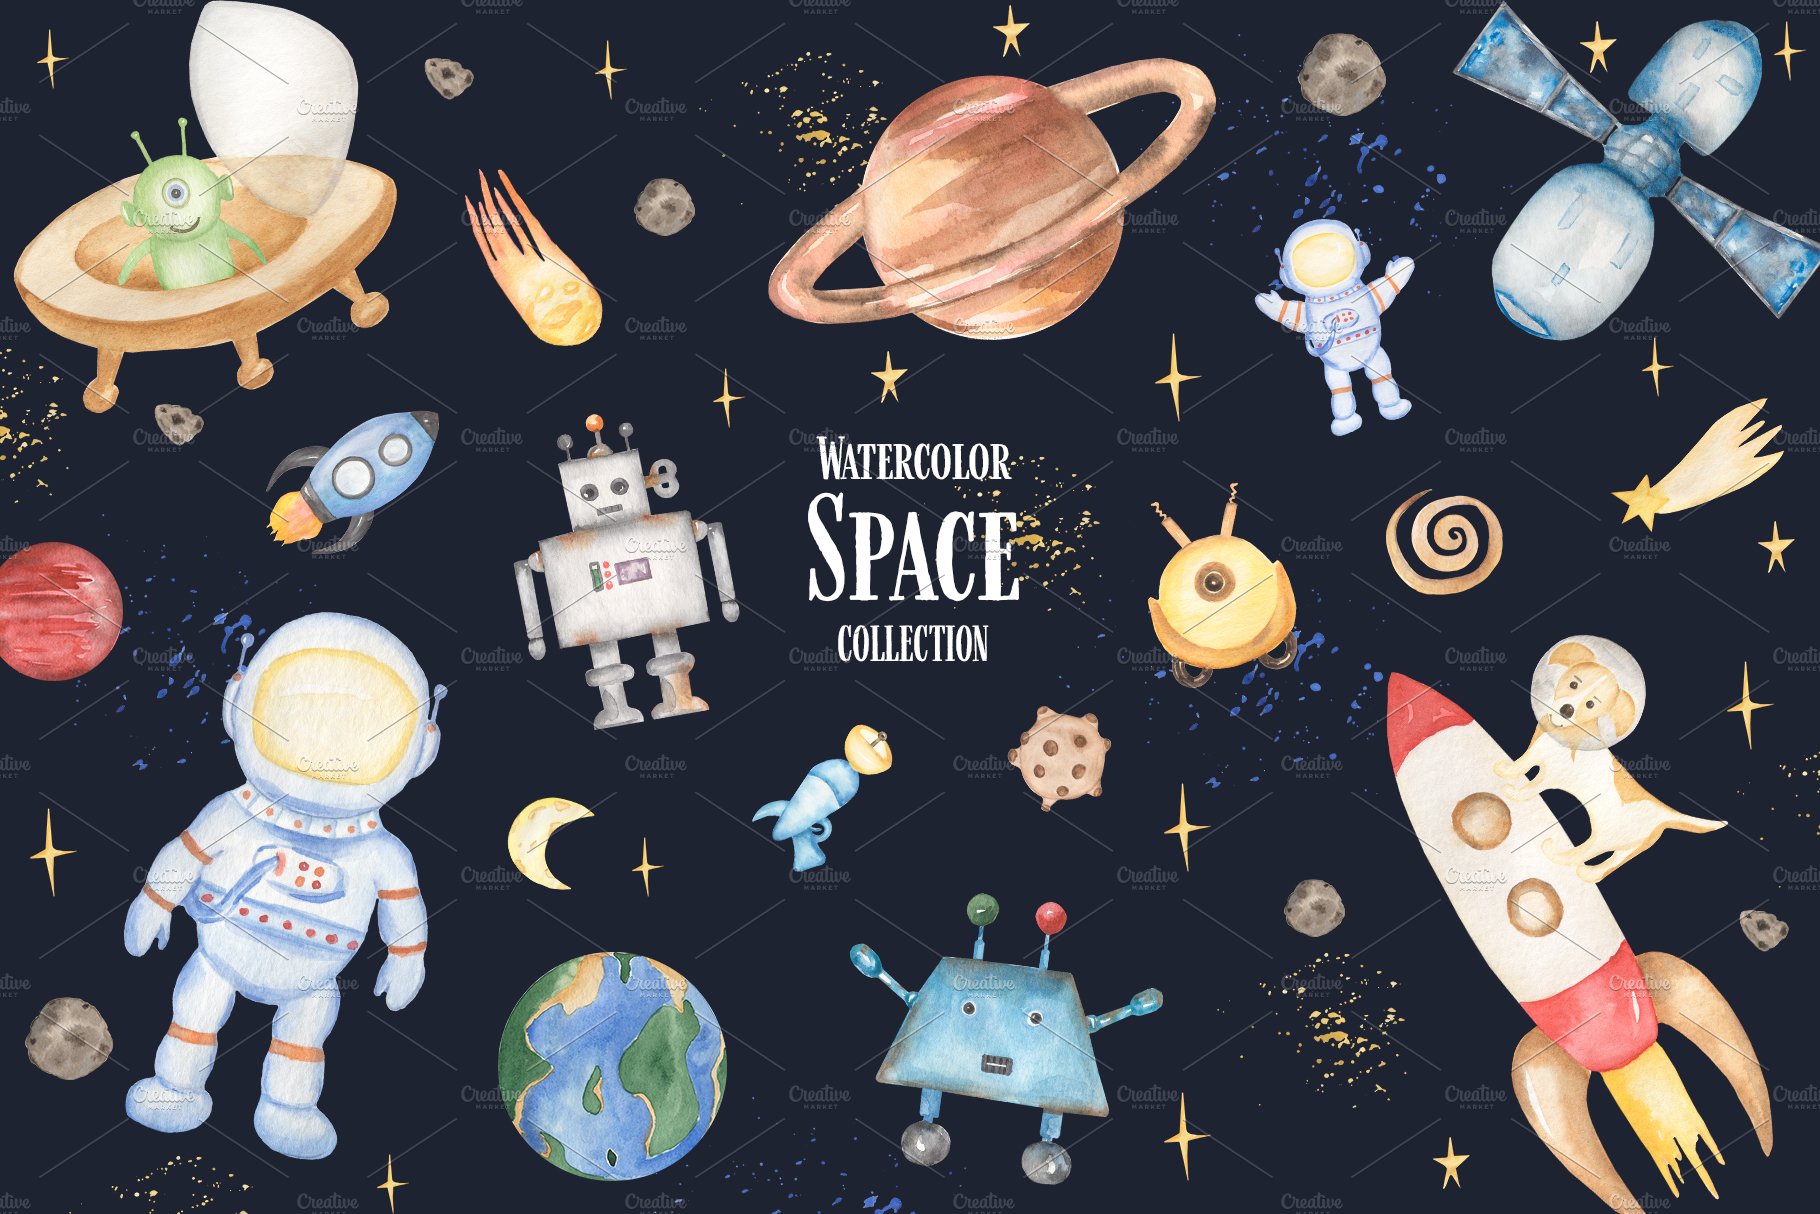 Watercolor Cute Space Collection cover image.